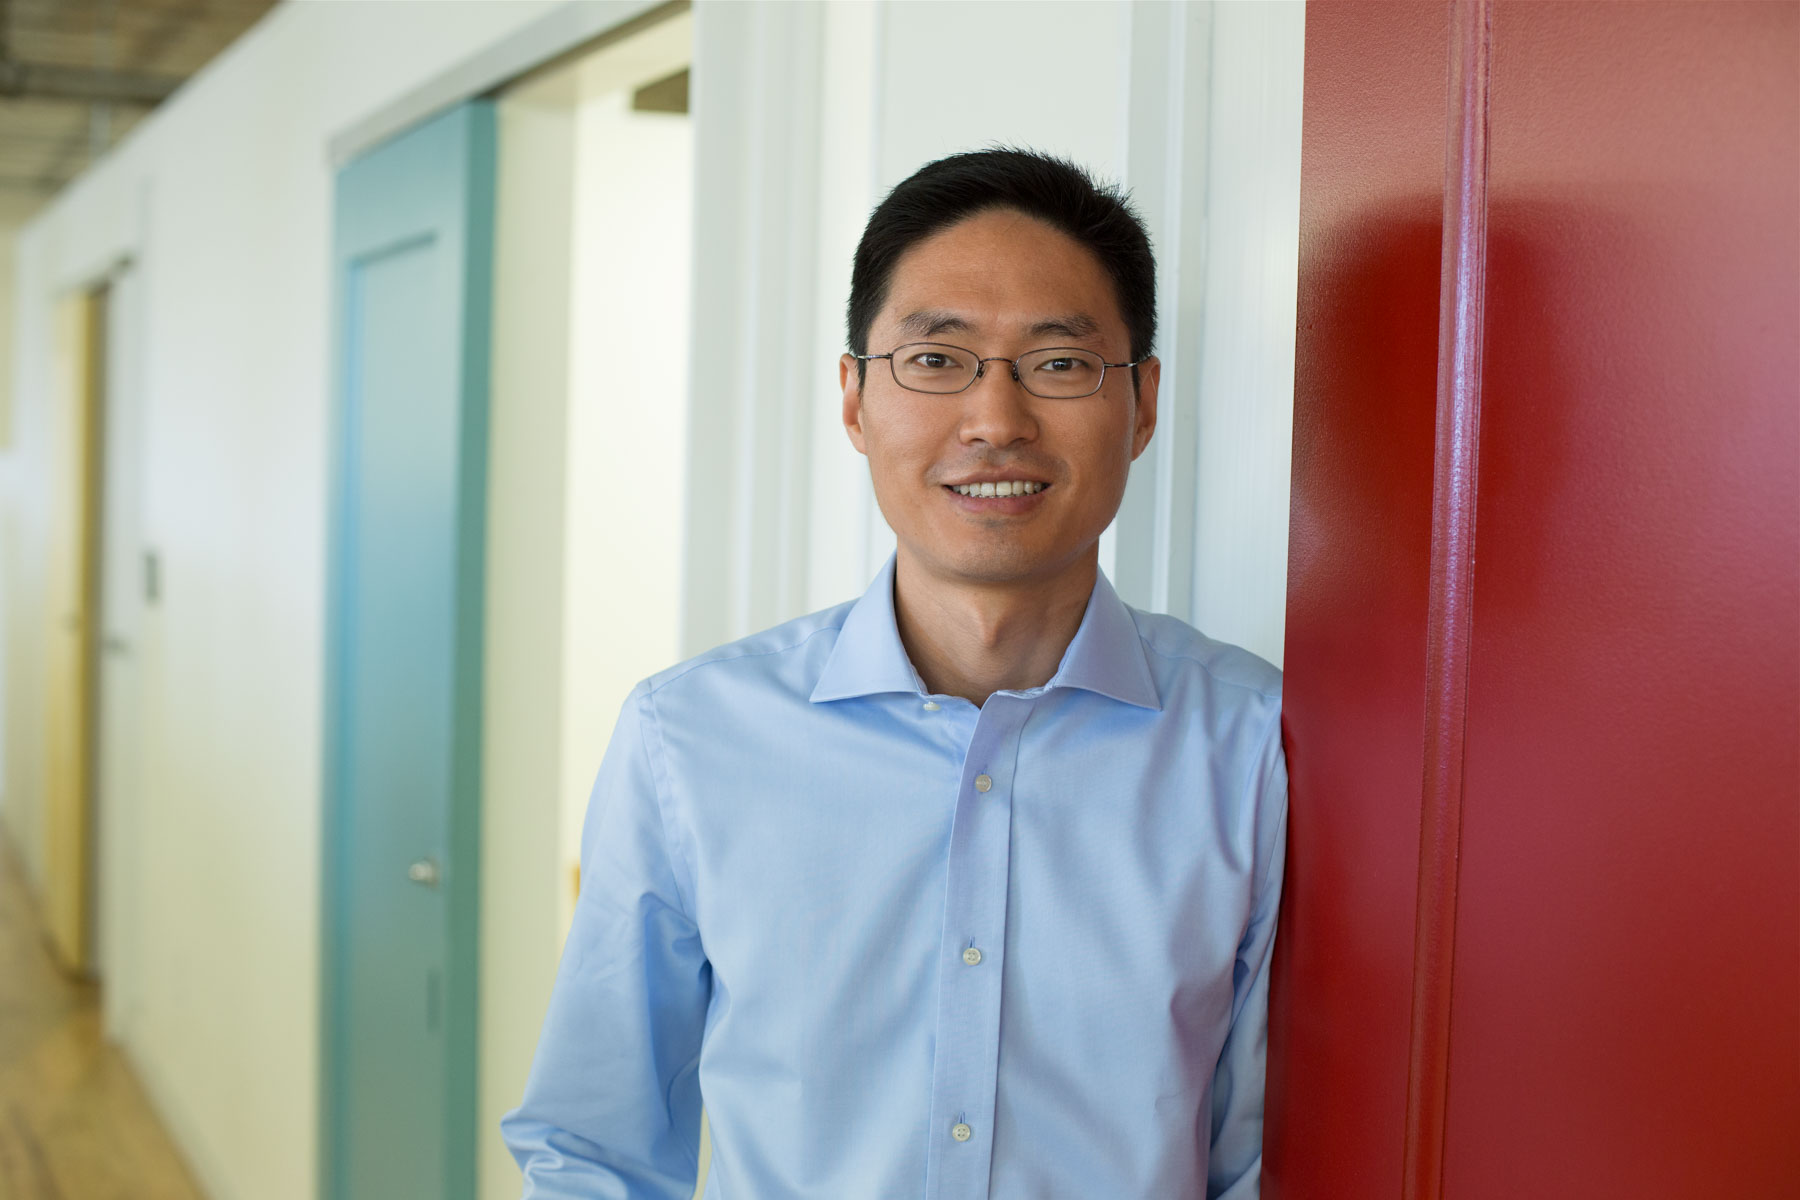 Branding photo of an Asian man in a colorful office environment